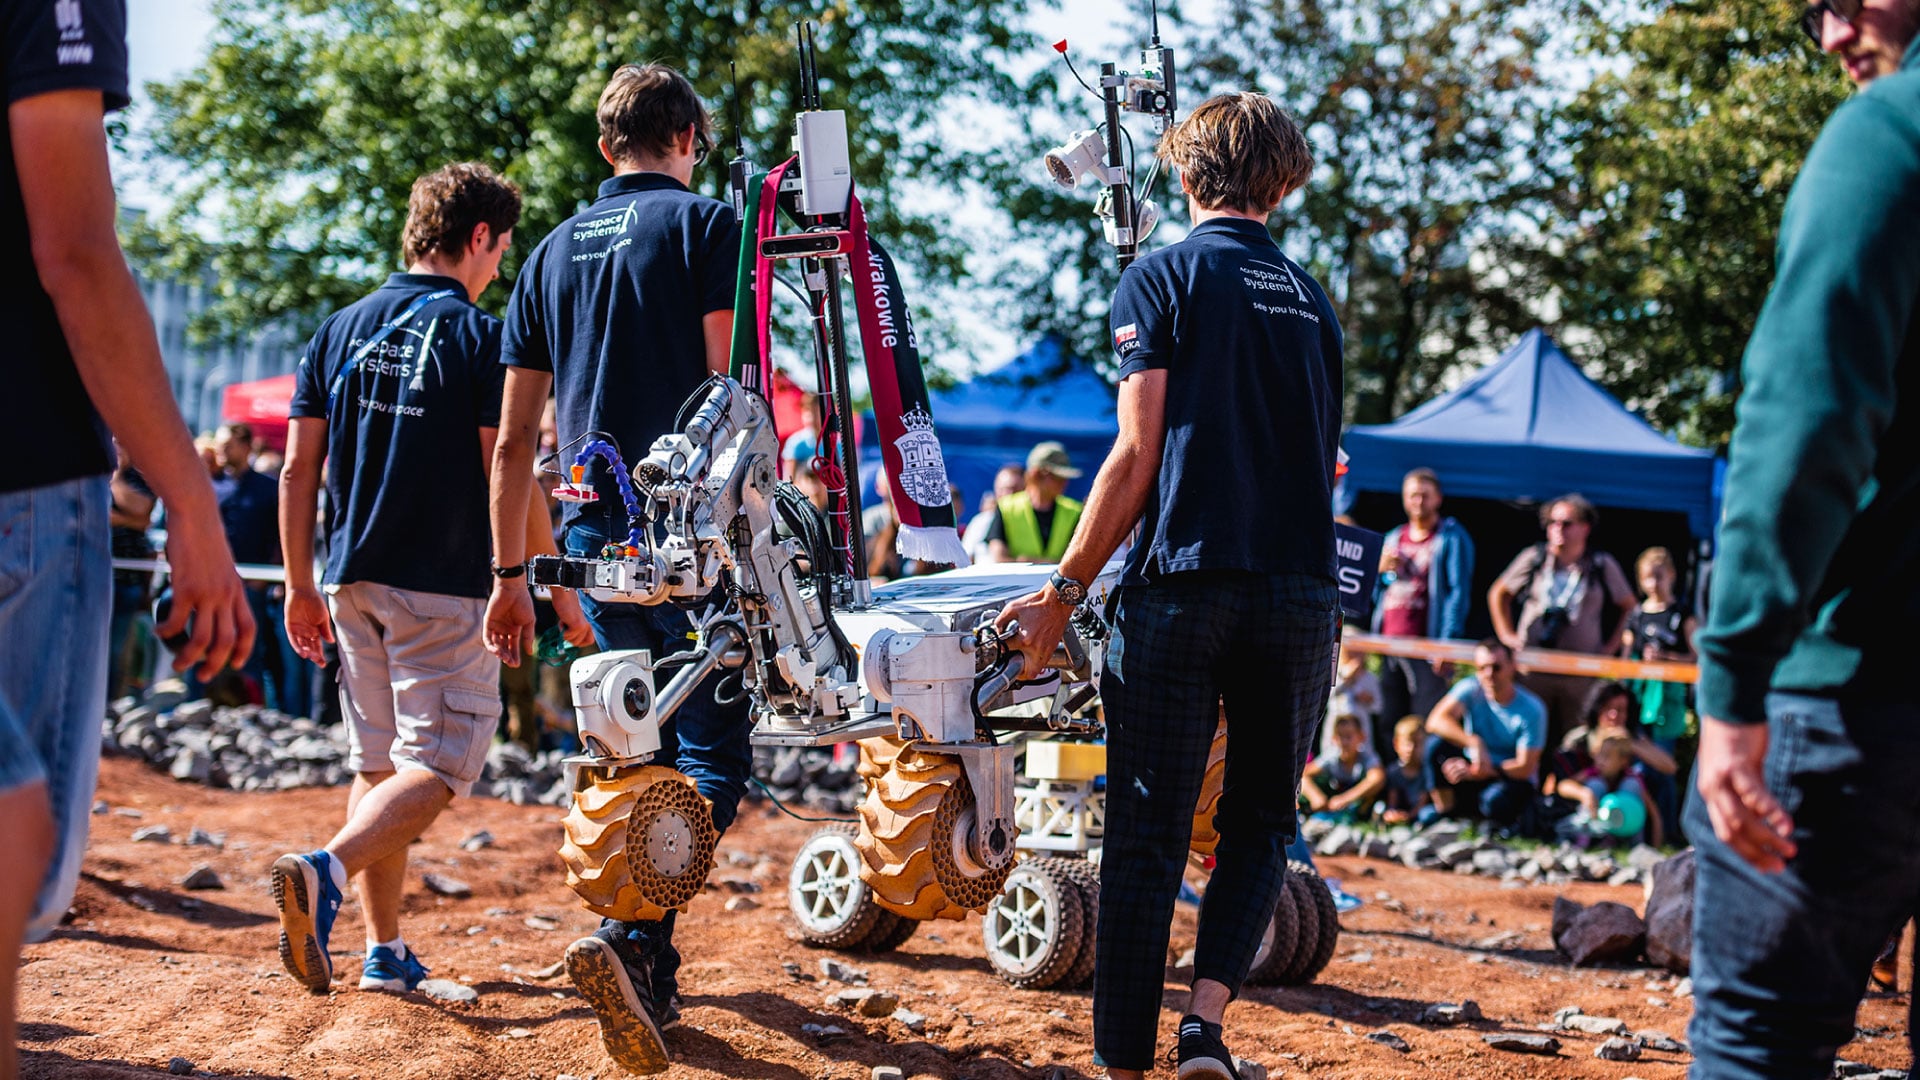 European Rover Challenge | International Martian rover competition!